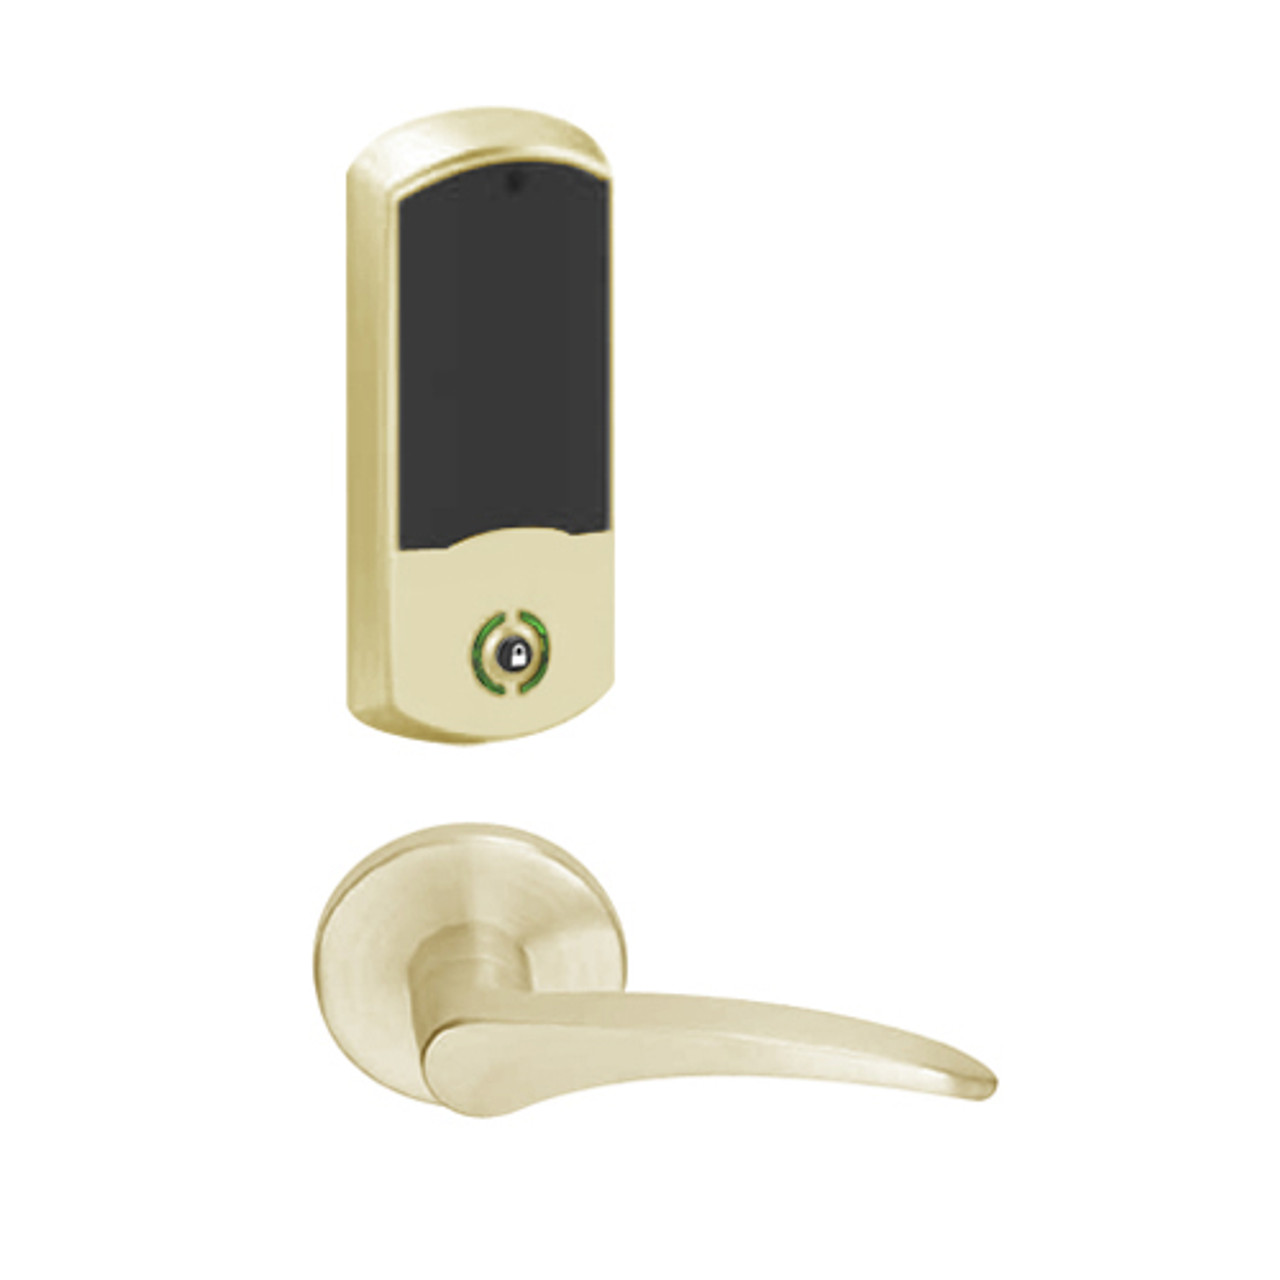 LEMB-GRW-BD-12-606-00B-RH Schlage Privacy/Office Wireless Greenwich Mortise Lock with Push Button & LED Indicator and 12 Lever Prepped for SFIC in Satin Brass